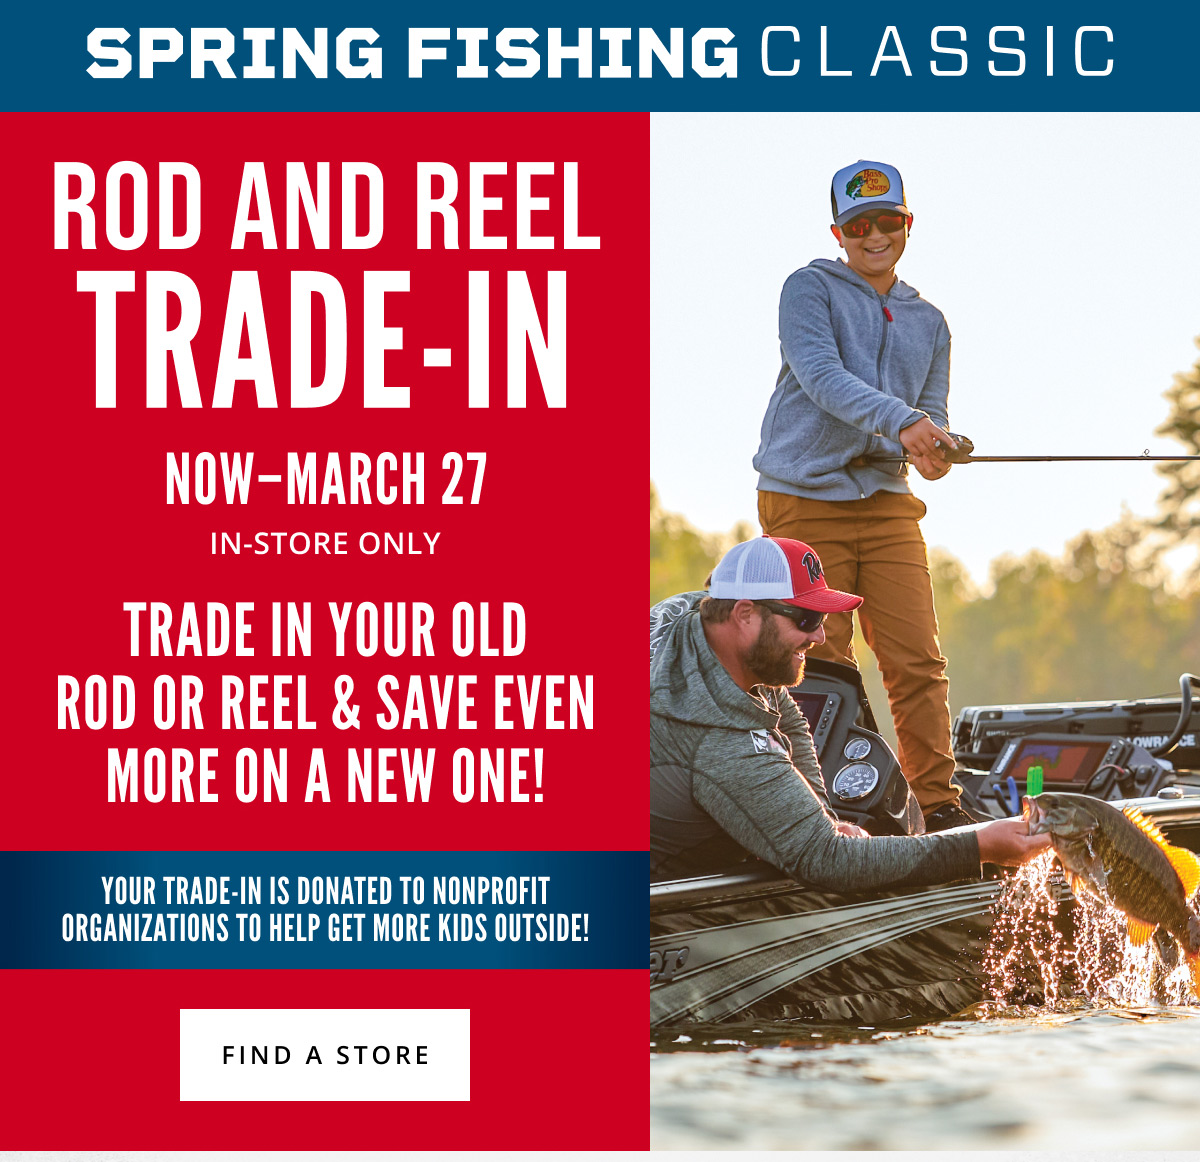 Cabela's - Trade in your gently used reel and save 20%